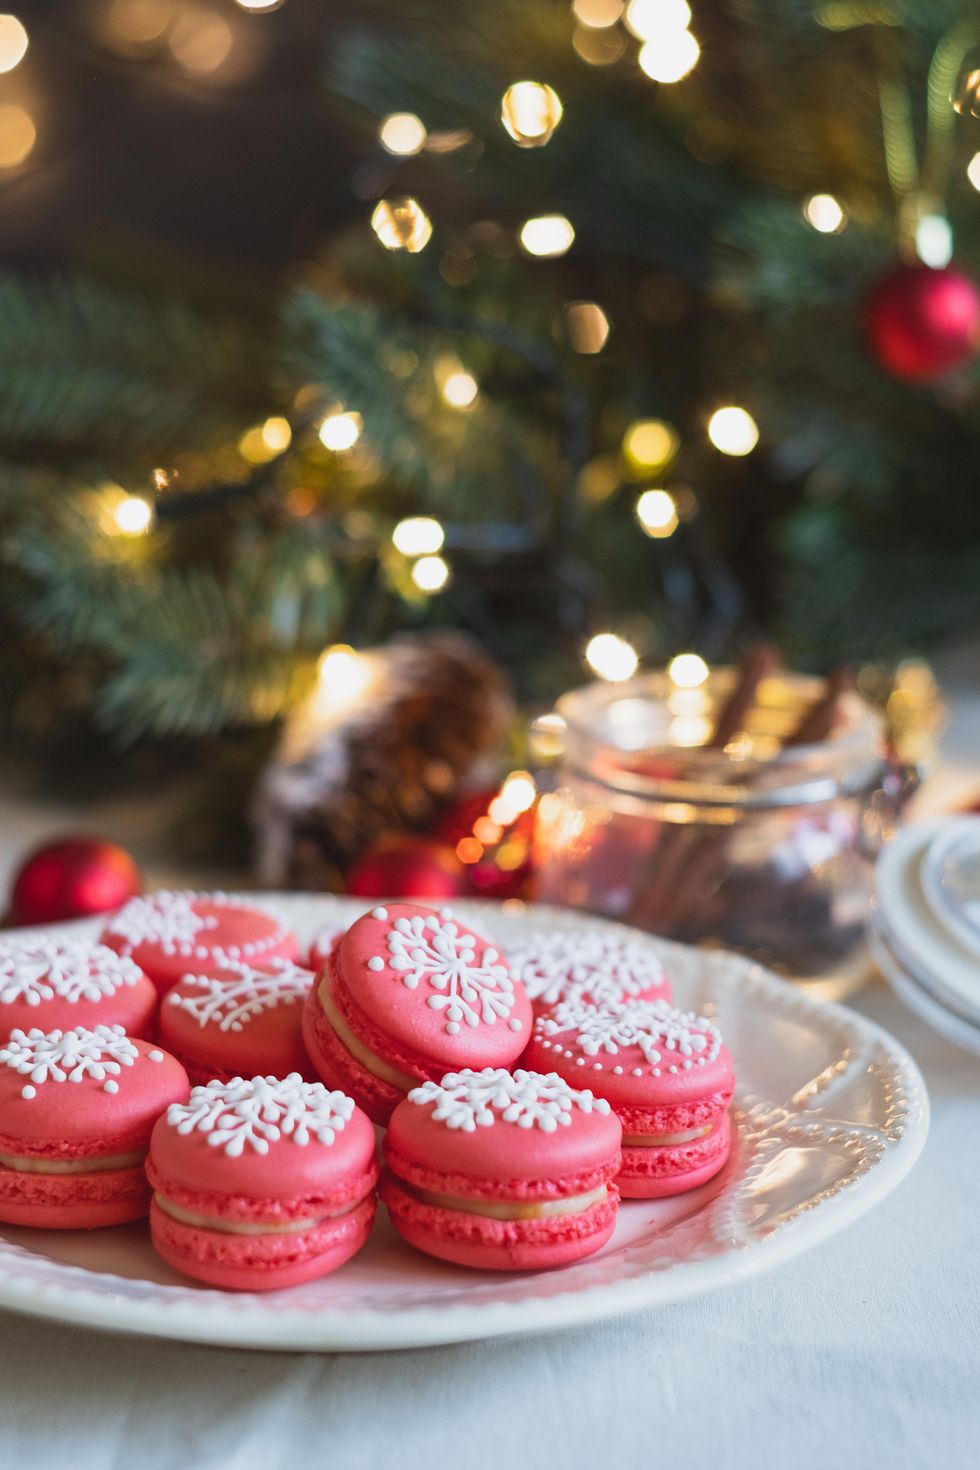 5 Festive Recipes To Try This Holiday Season, According To A Dessert Enthusiast